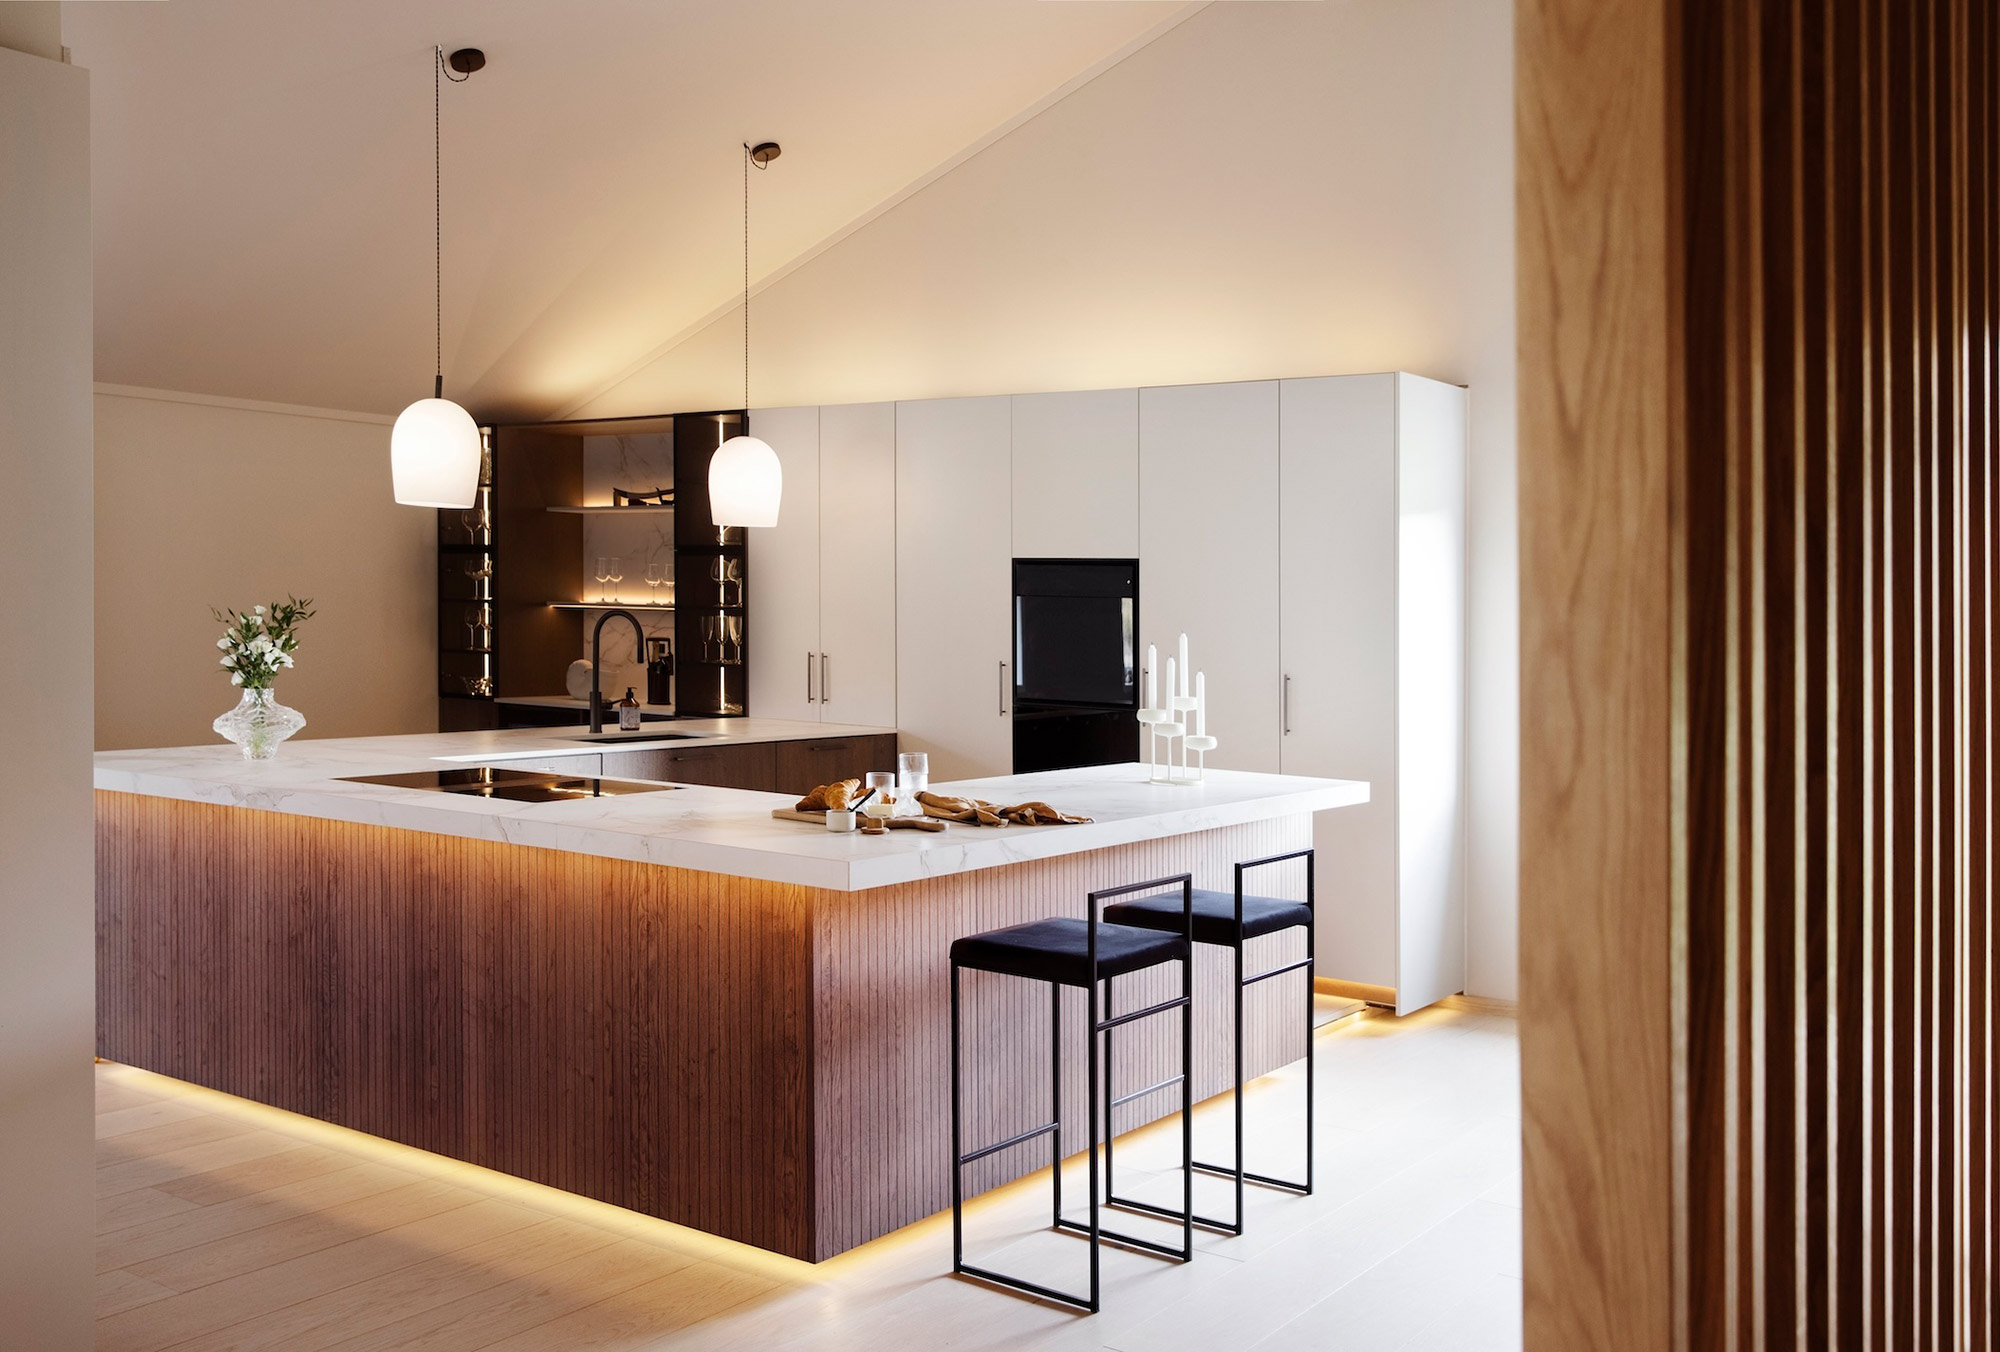 Image of Mads Clemmetsen 1 in Dekton Sirius adds a welcoming touch to the kitchens of a residential development in Dubai - Cosentino